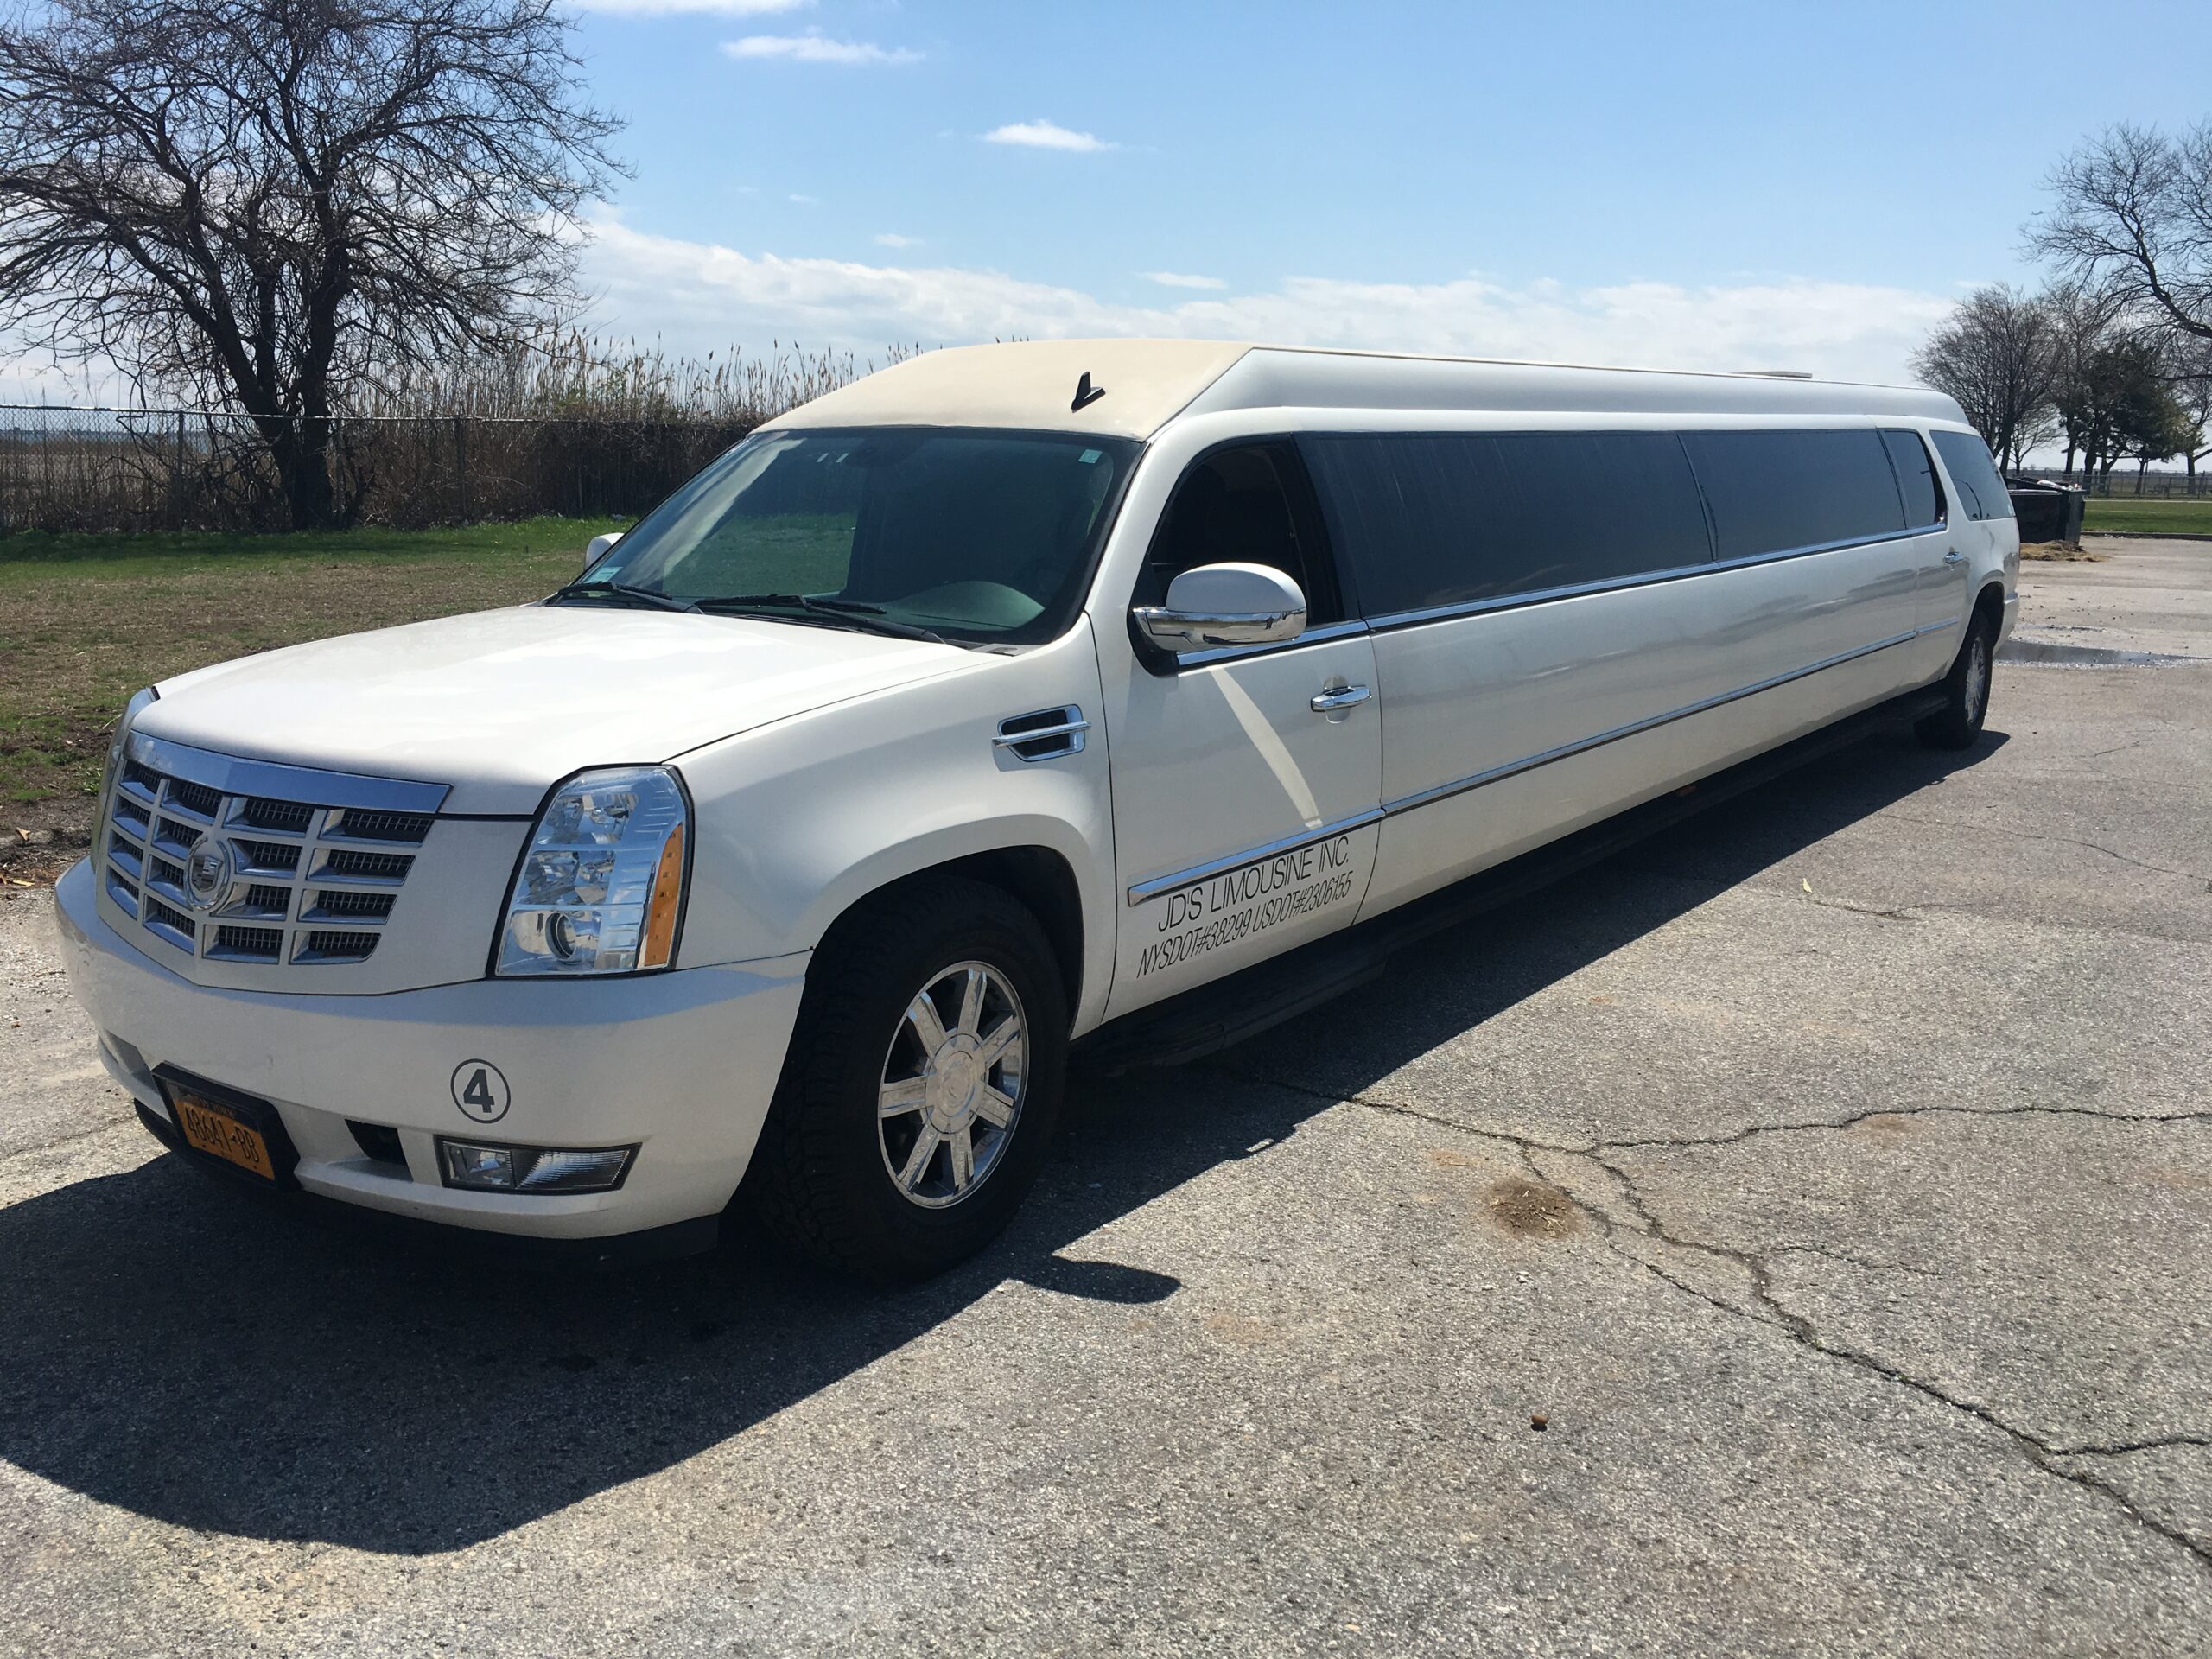 Long Island Prom Limousine New York Prom Limo Prom Limo Rental